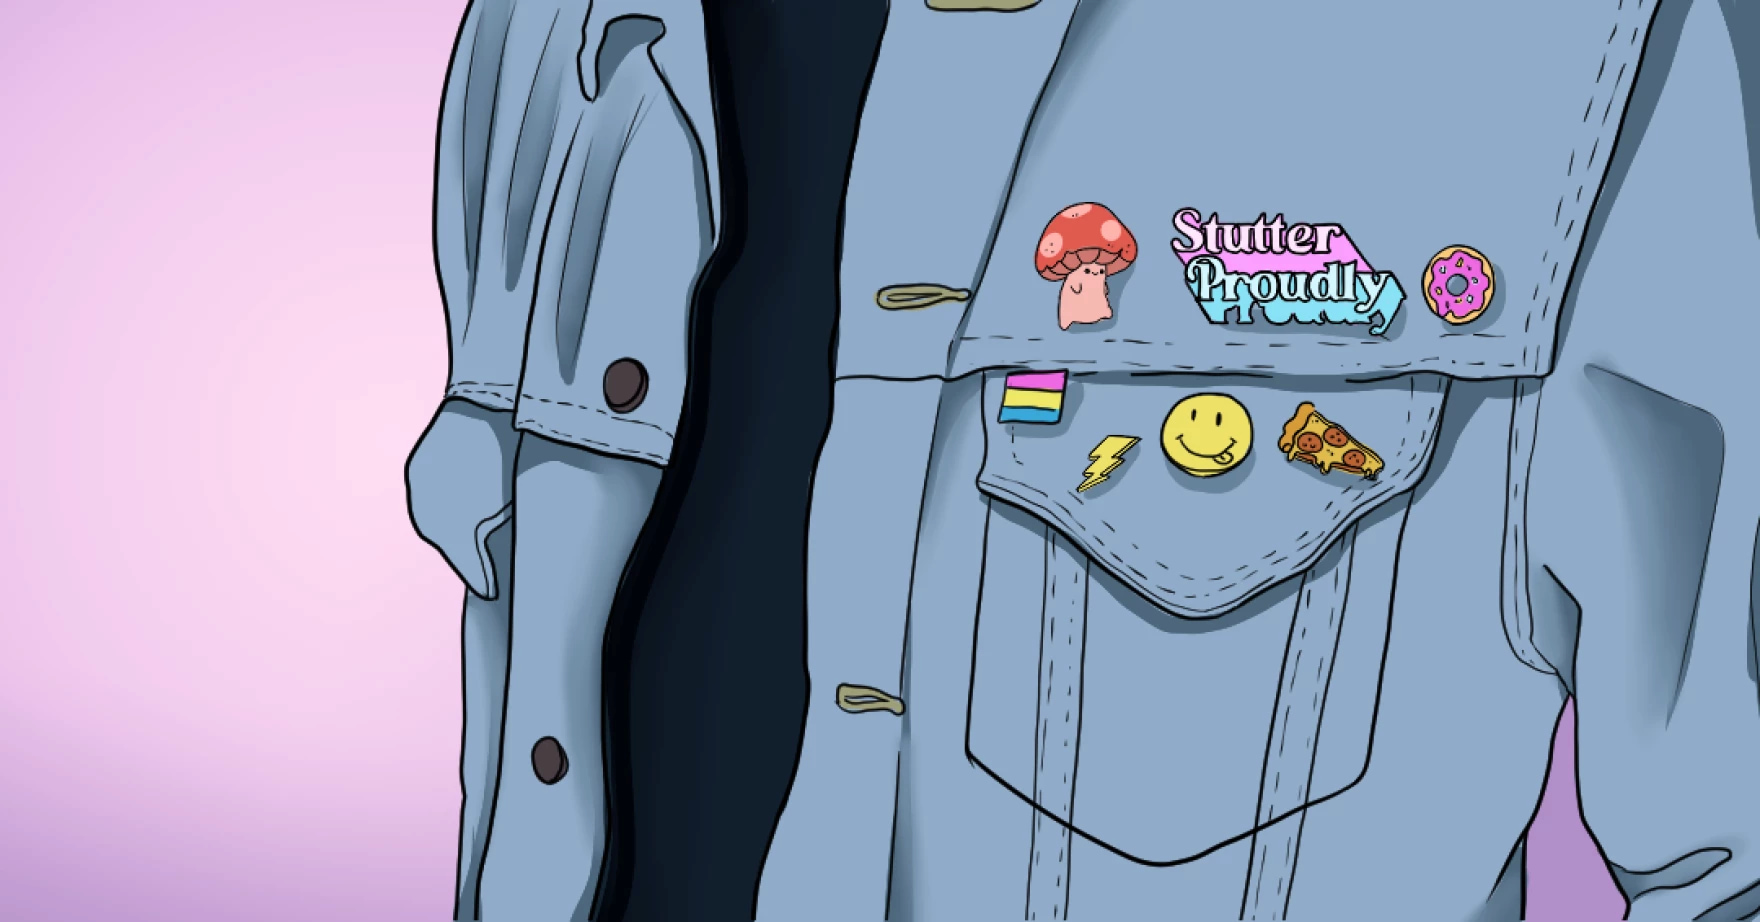 An illustration of a person's chest, without a view of their face. The person is wearing a dark shirt under a denim jacket that features several colorful pins: a pansexual flag, a lightning bolt, a friendly mushroom, a smiley face with a stuck-out tongue, a slice of pepperoni pizza, a donut with pink frosting and sprinkles and a pin that says Stutter Proudly